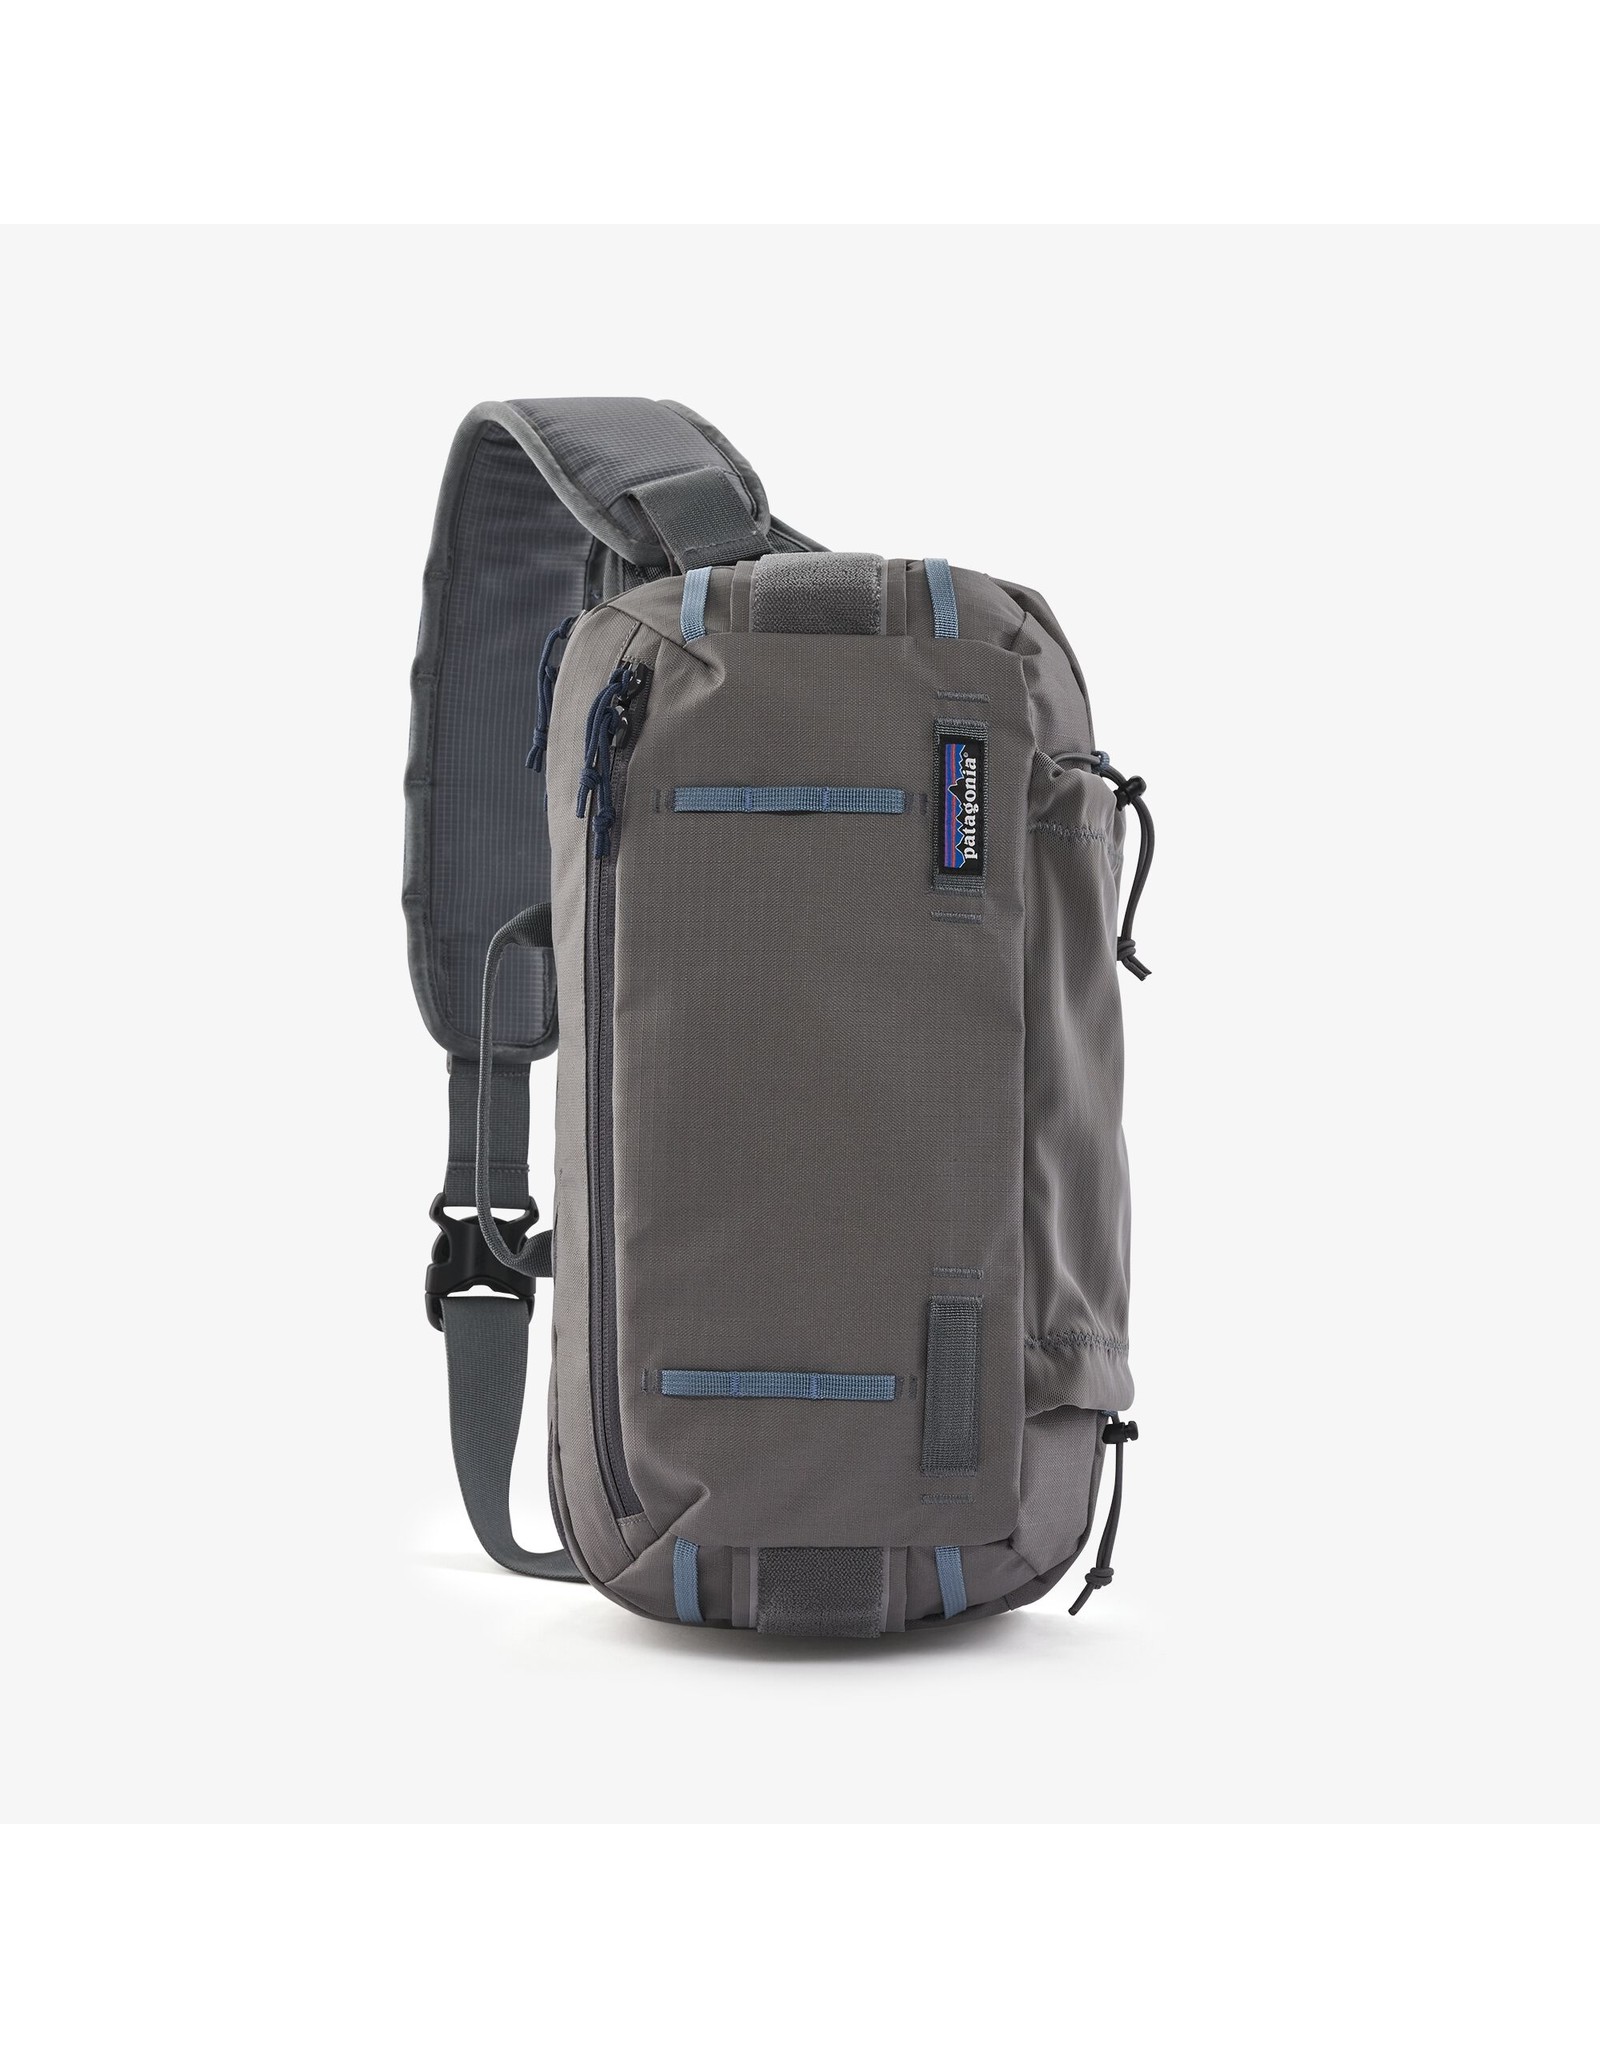 Fly Fishing Gear Review: The Patagonia Stealth Hip Pack 10L – The